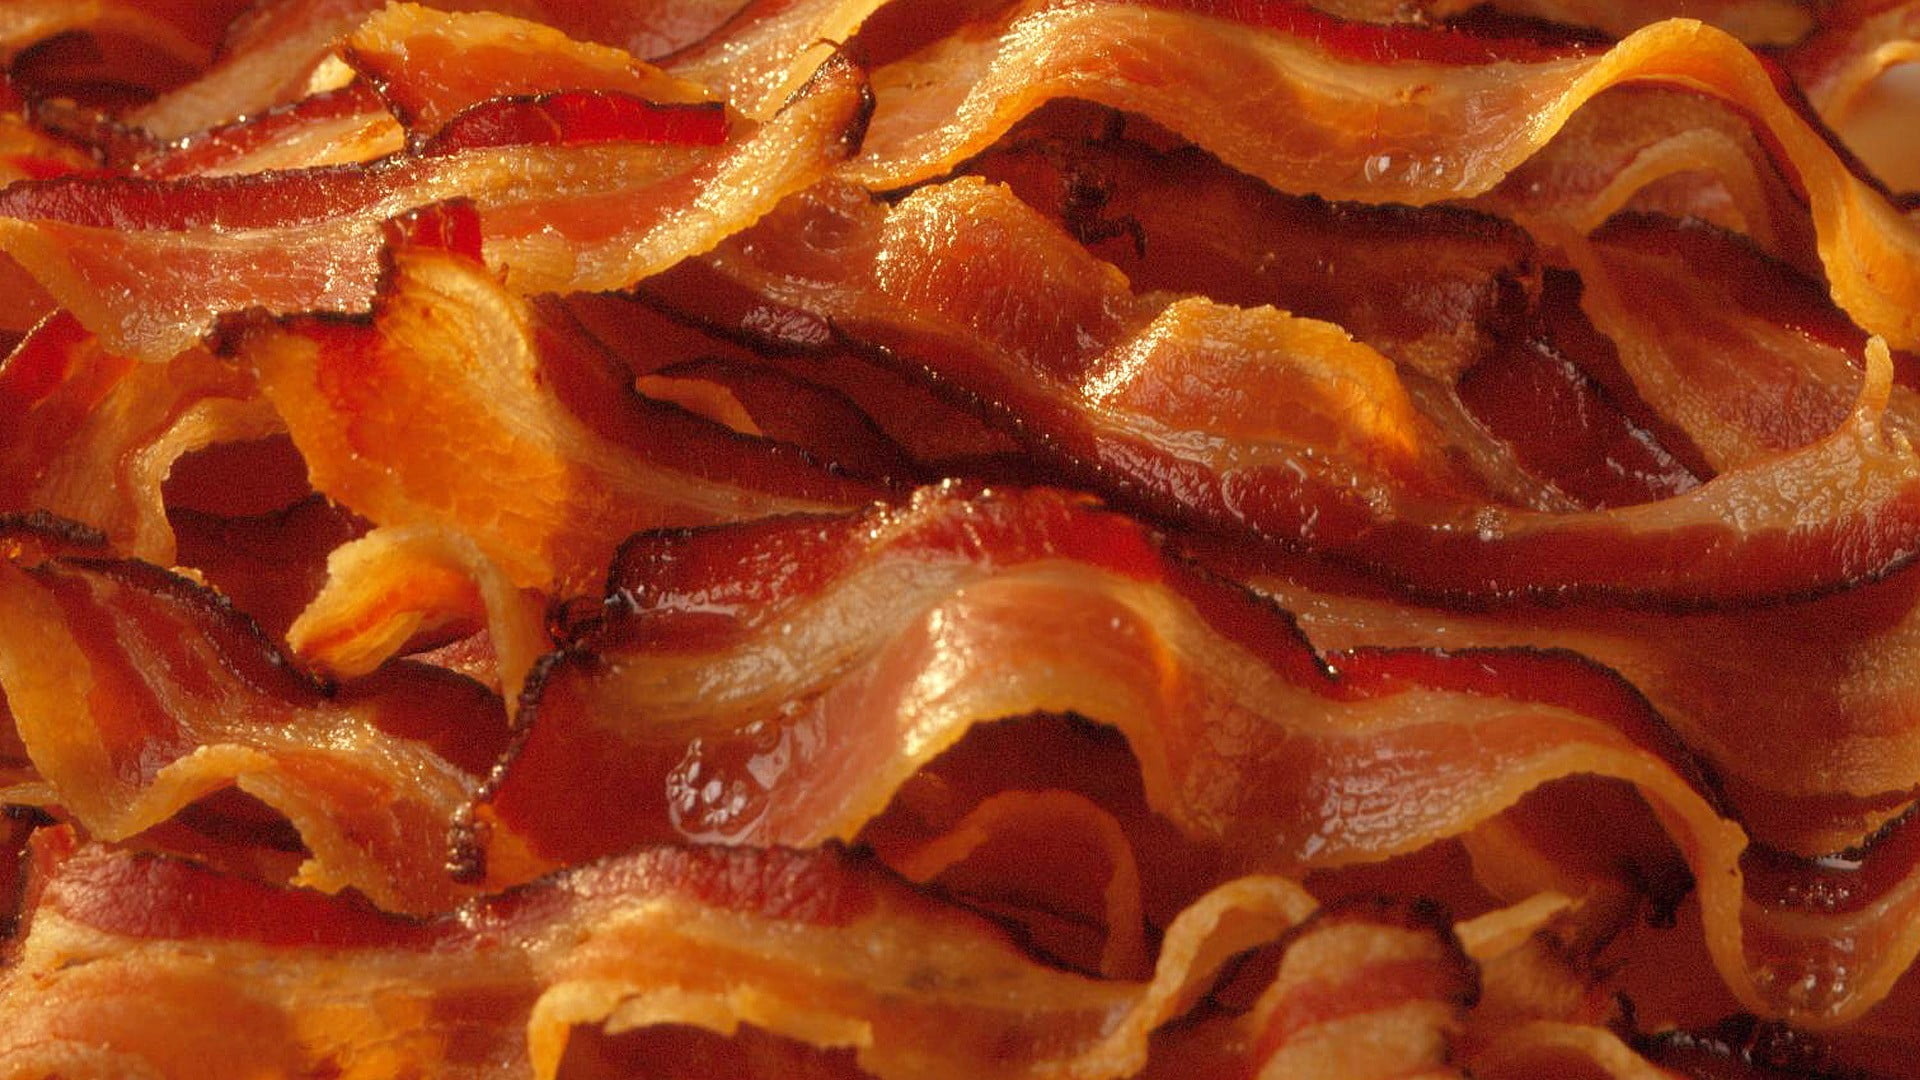 bacon strips, food, food and drink, freshness, full frame, backgrounds